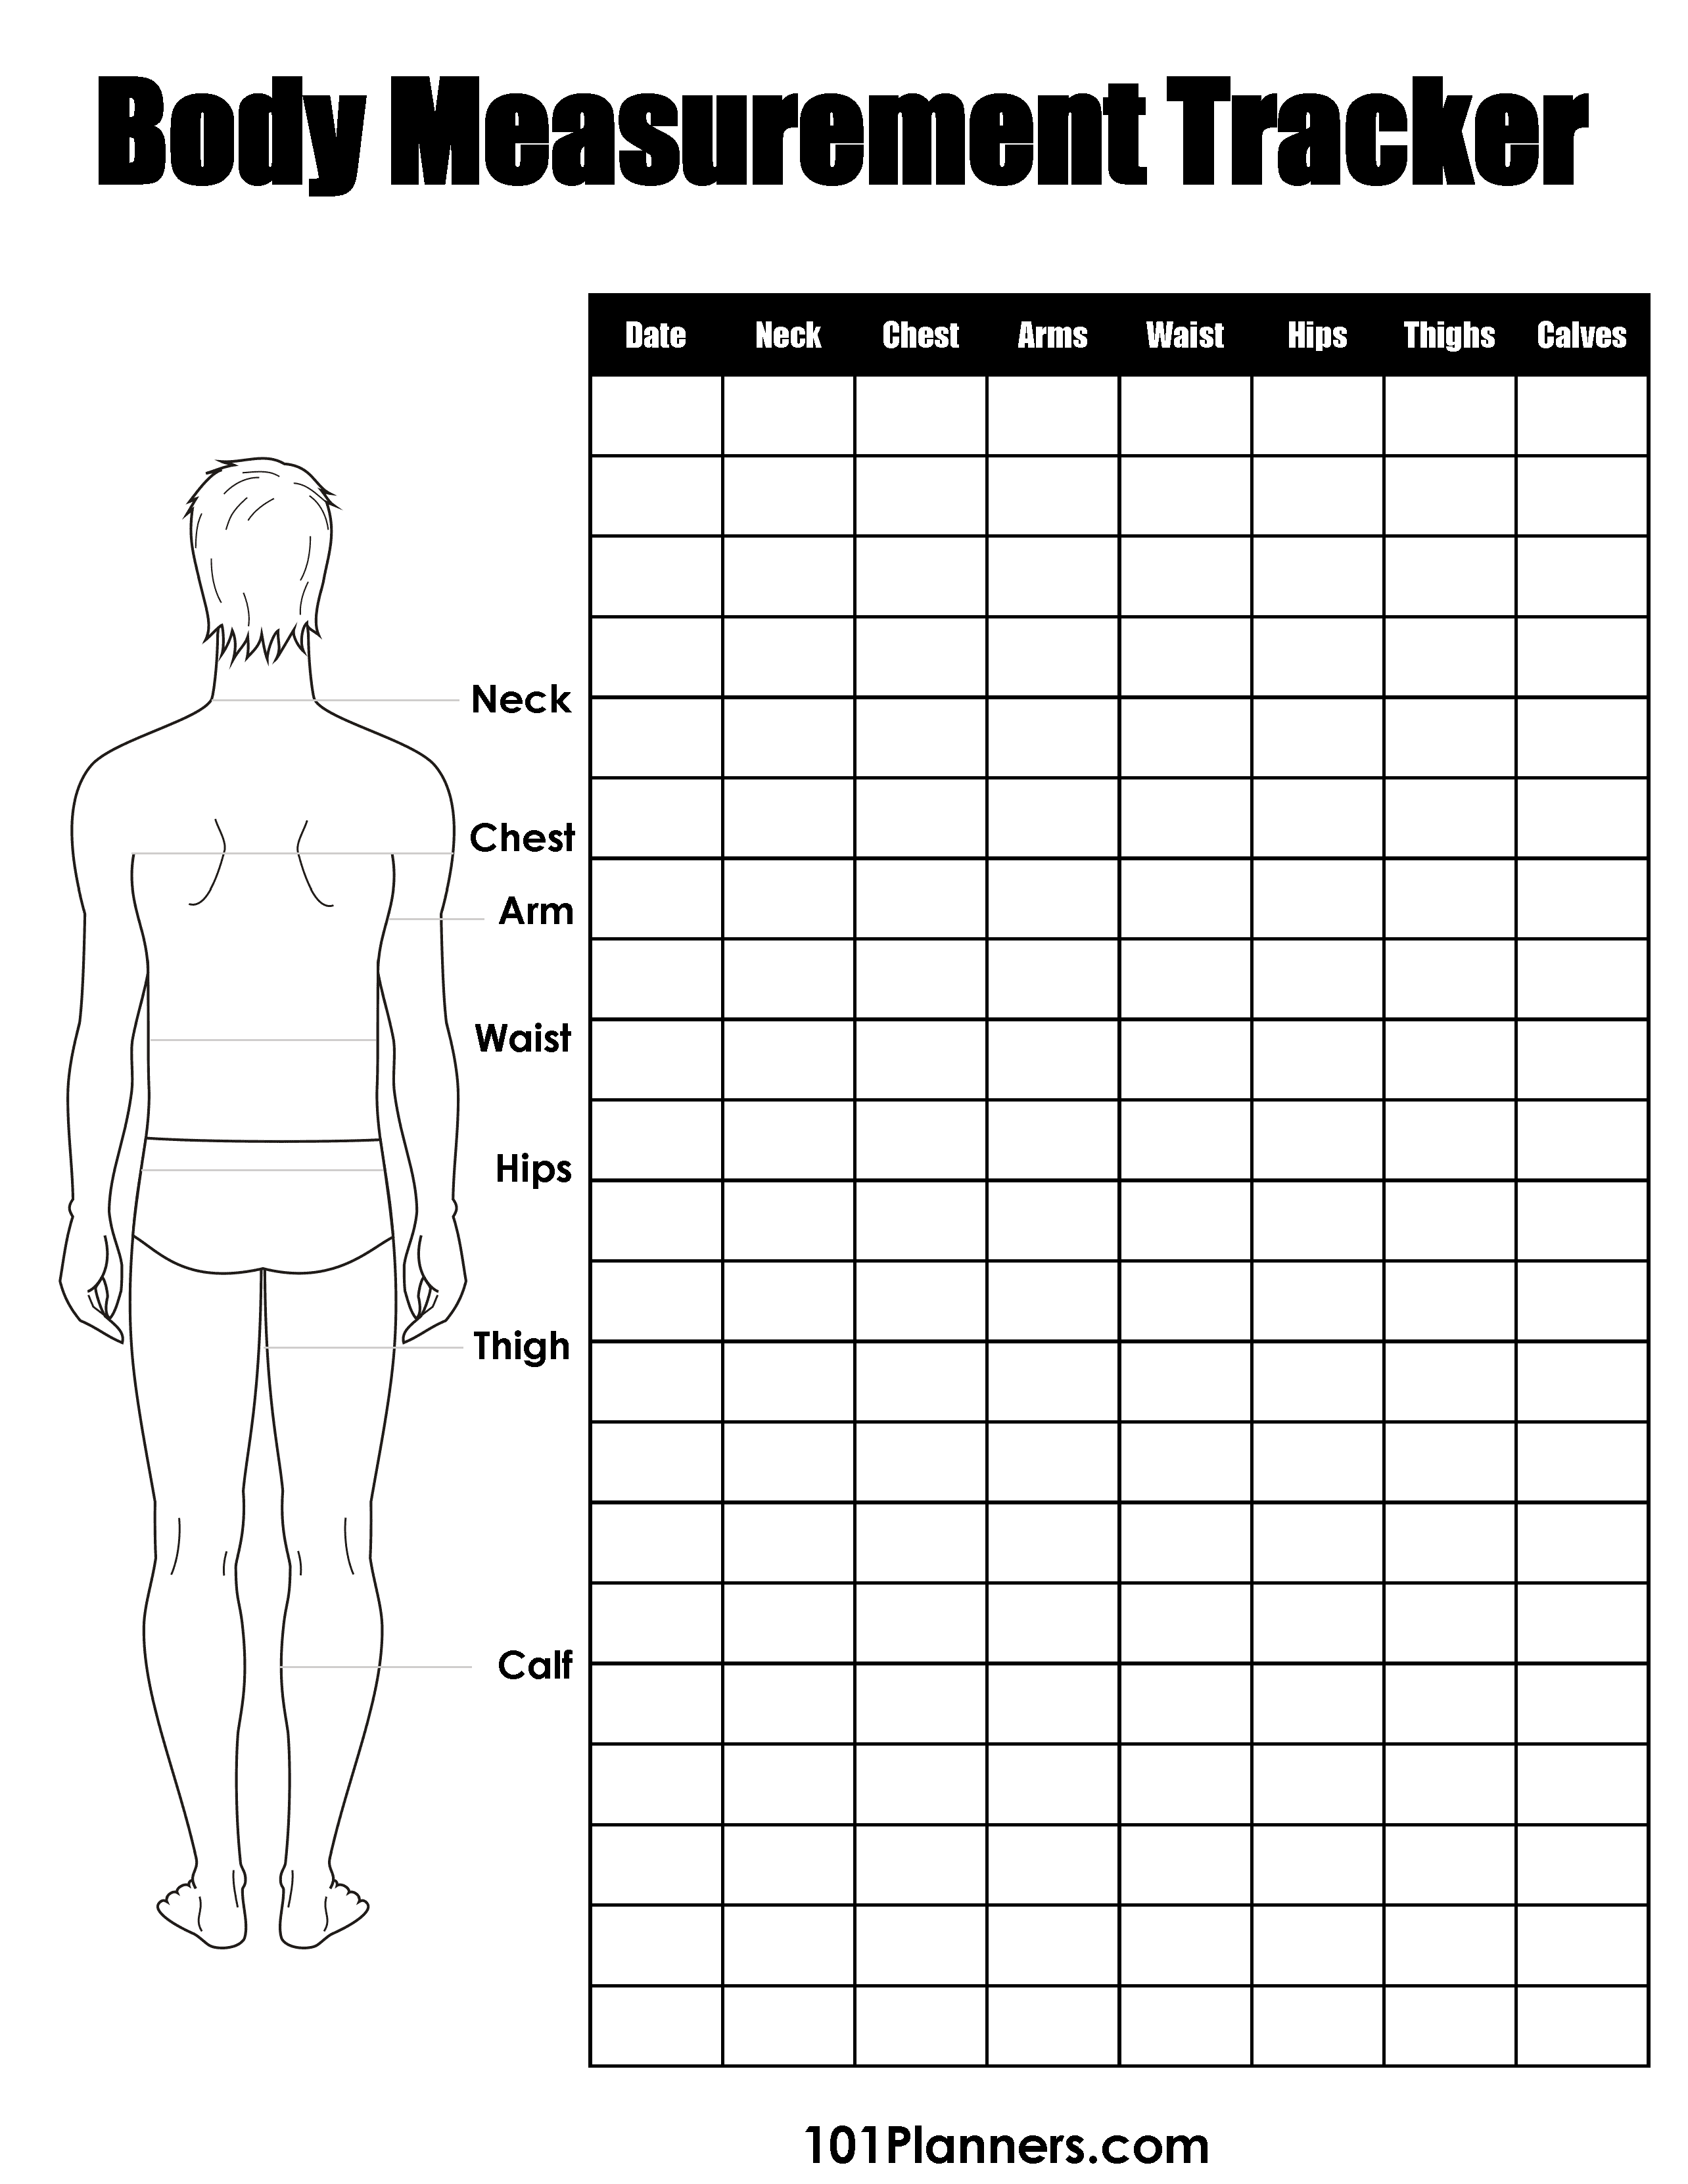 Track all your Body Metrics with This Scale